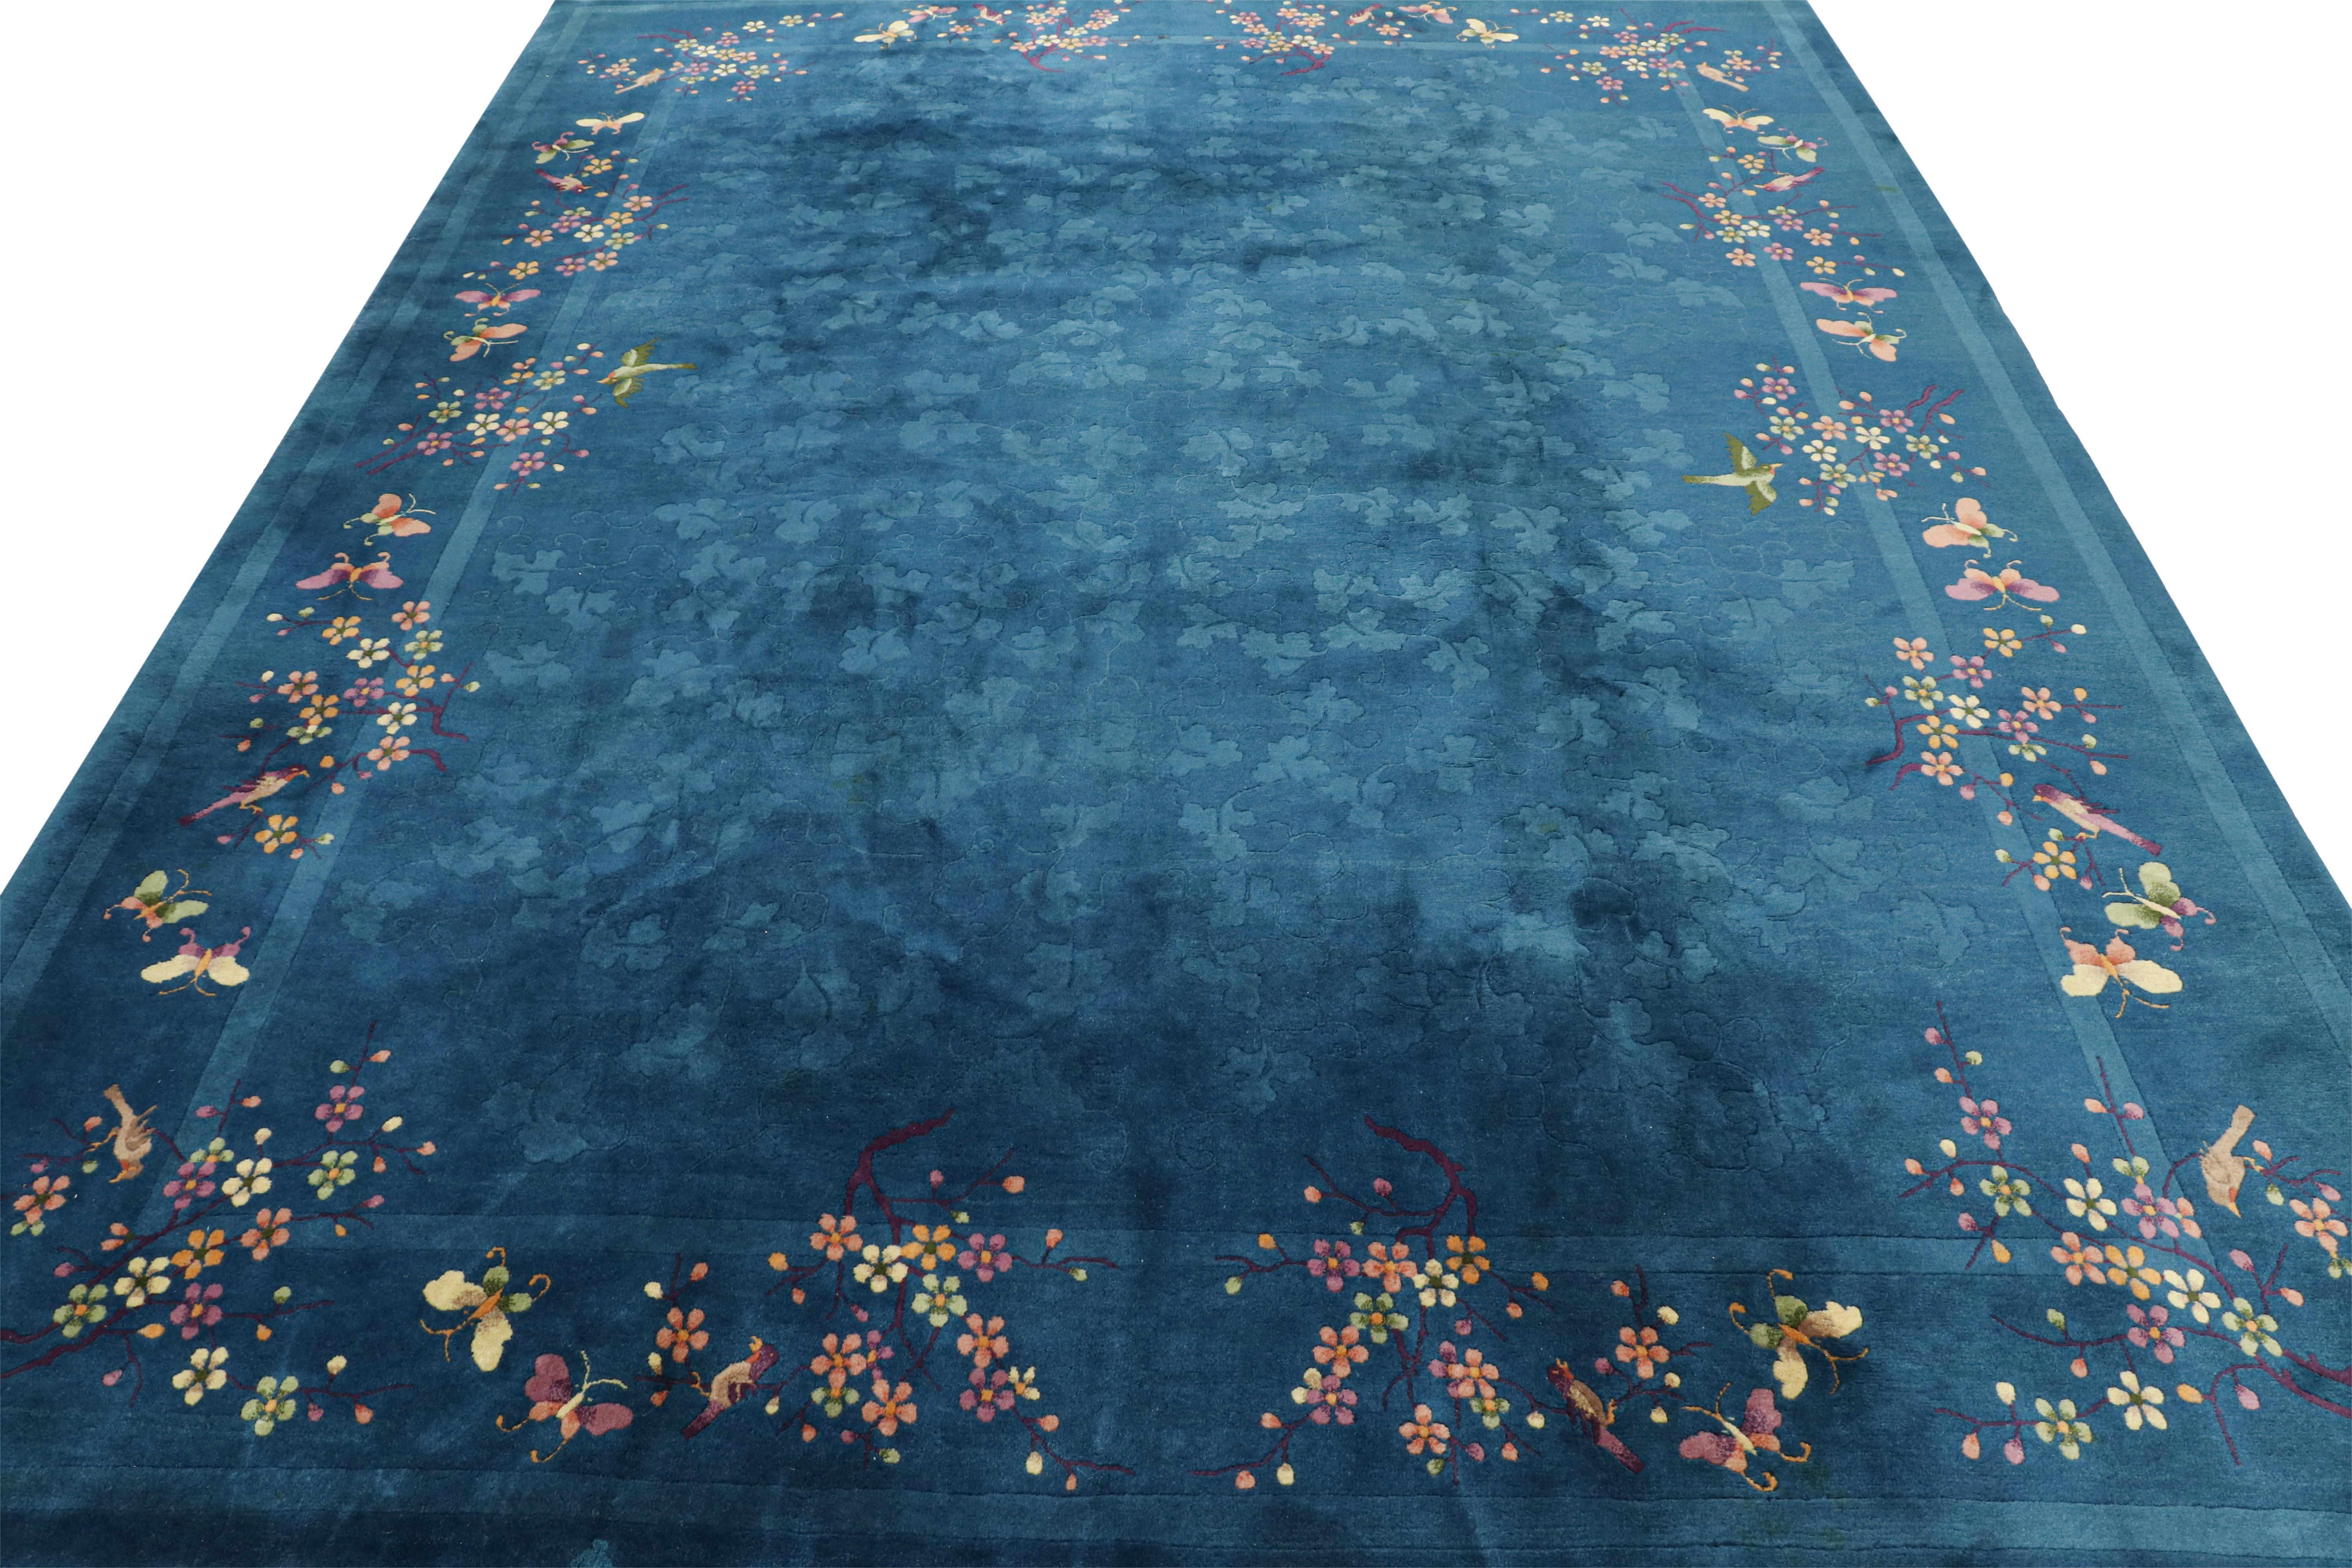 Antique Chinese Art Deco Rug in Blue with Floral Patterns, from Rug & Kilim In Good Condition For Sale In Long Island City, NY